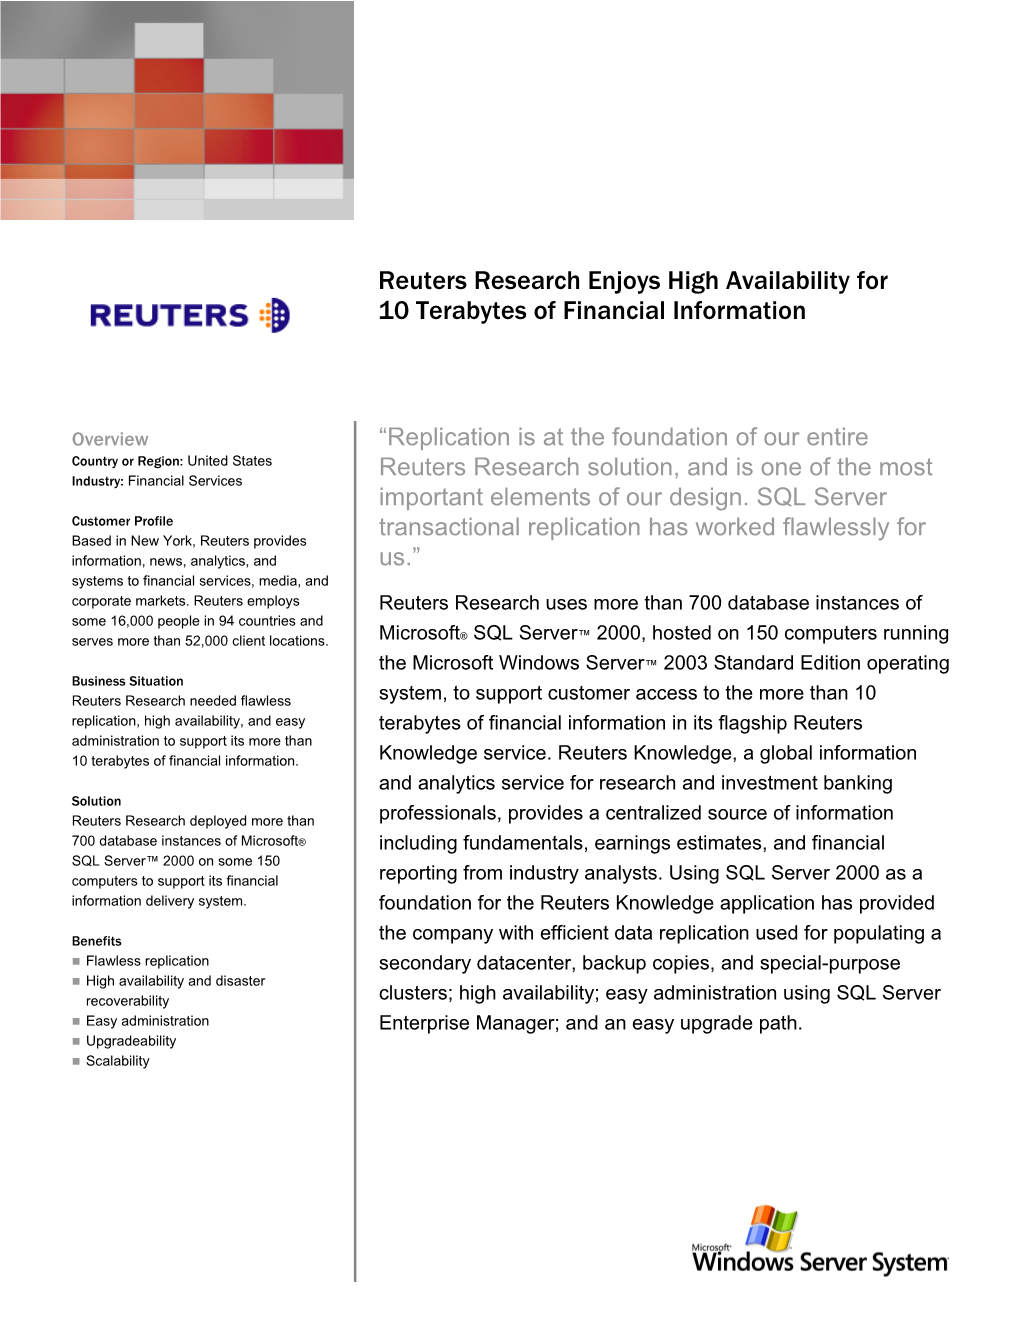 Reuters Research Enjoys High Availability for 10 Terabytes of Financial Information